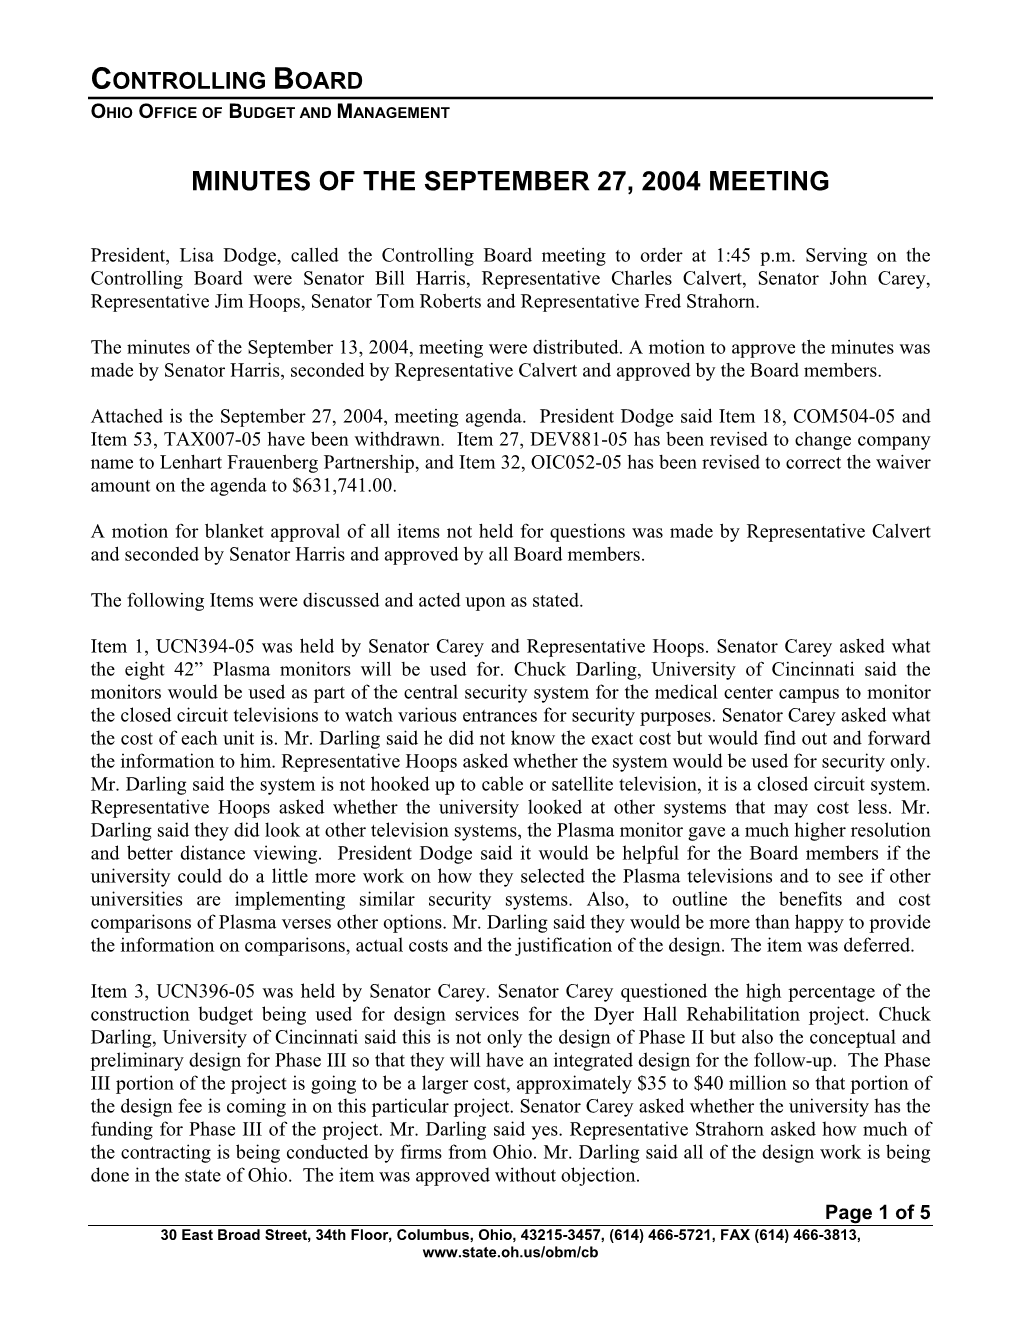 Minutes of the April 20, 1998 Controlling Board Meeting